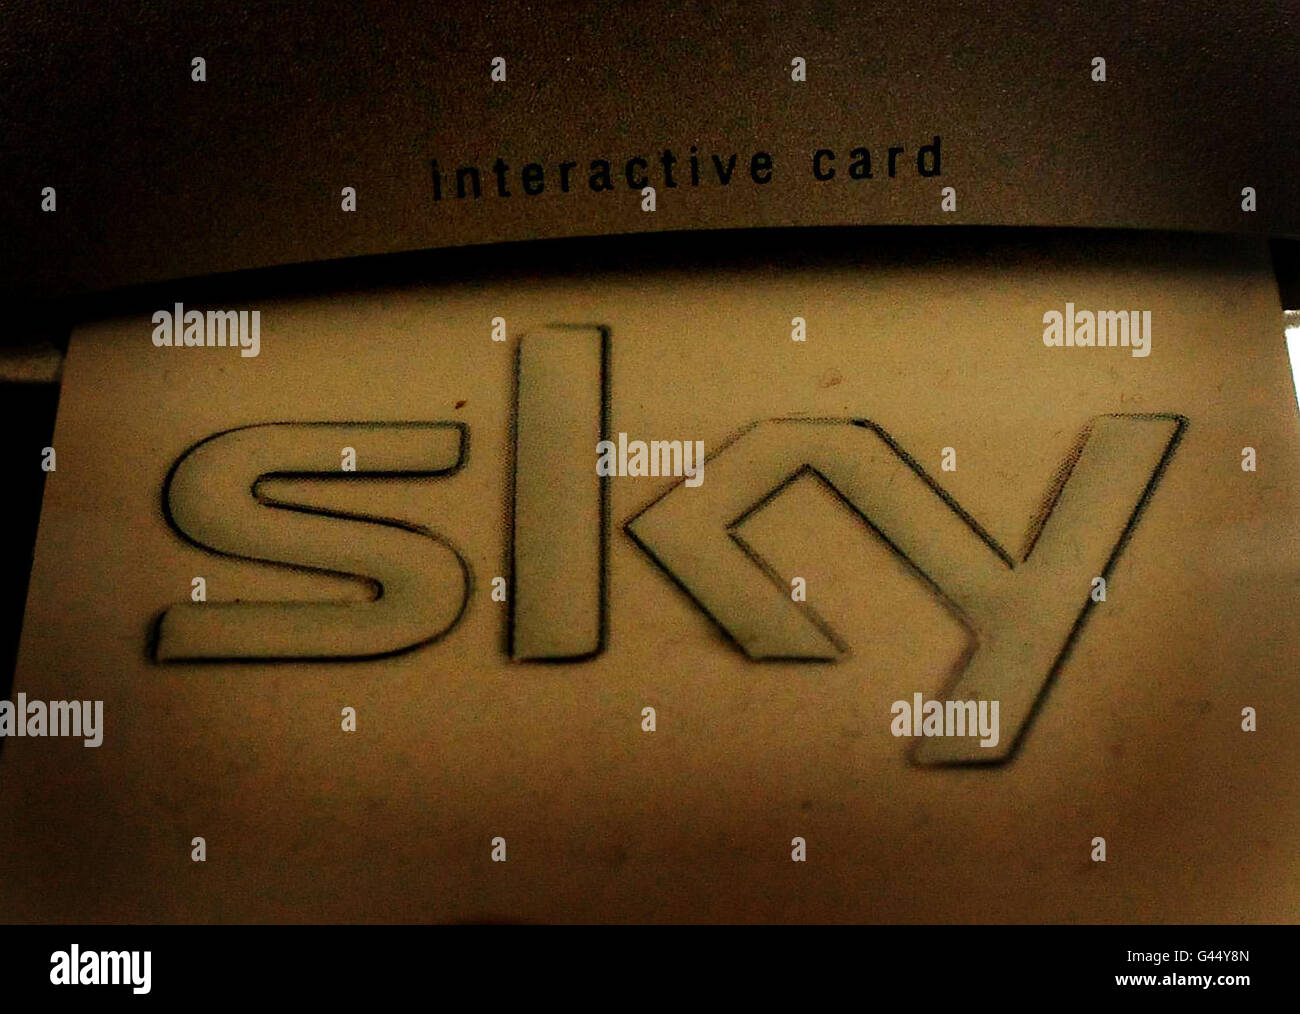 Sky Tv Box High Resolution Stock Photography and Images - Alamy